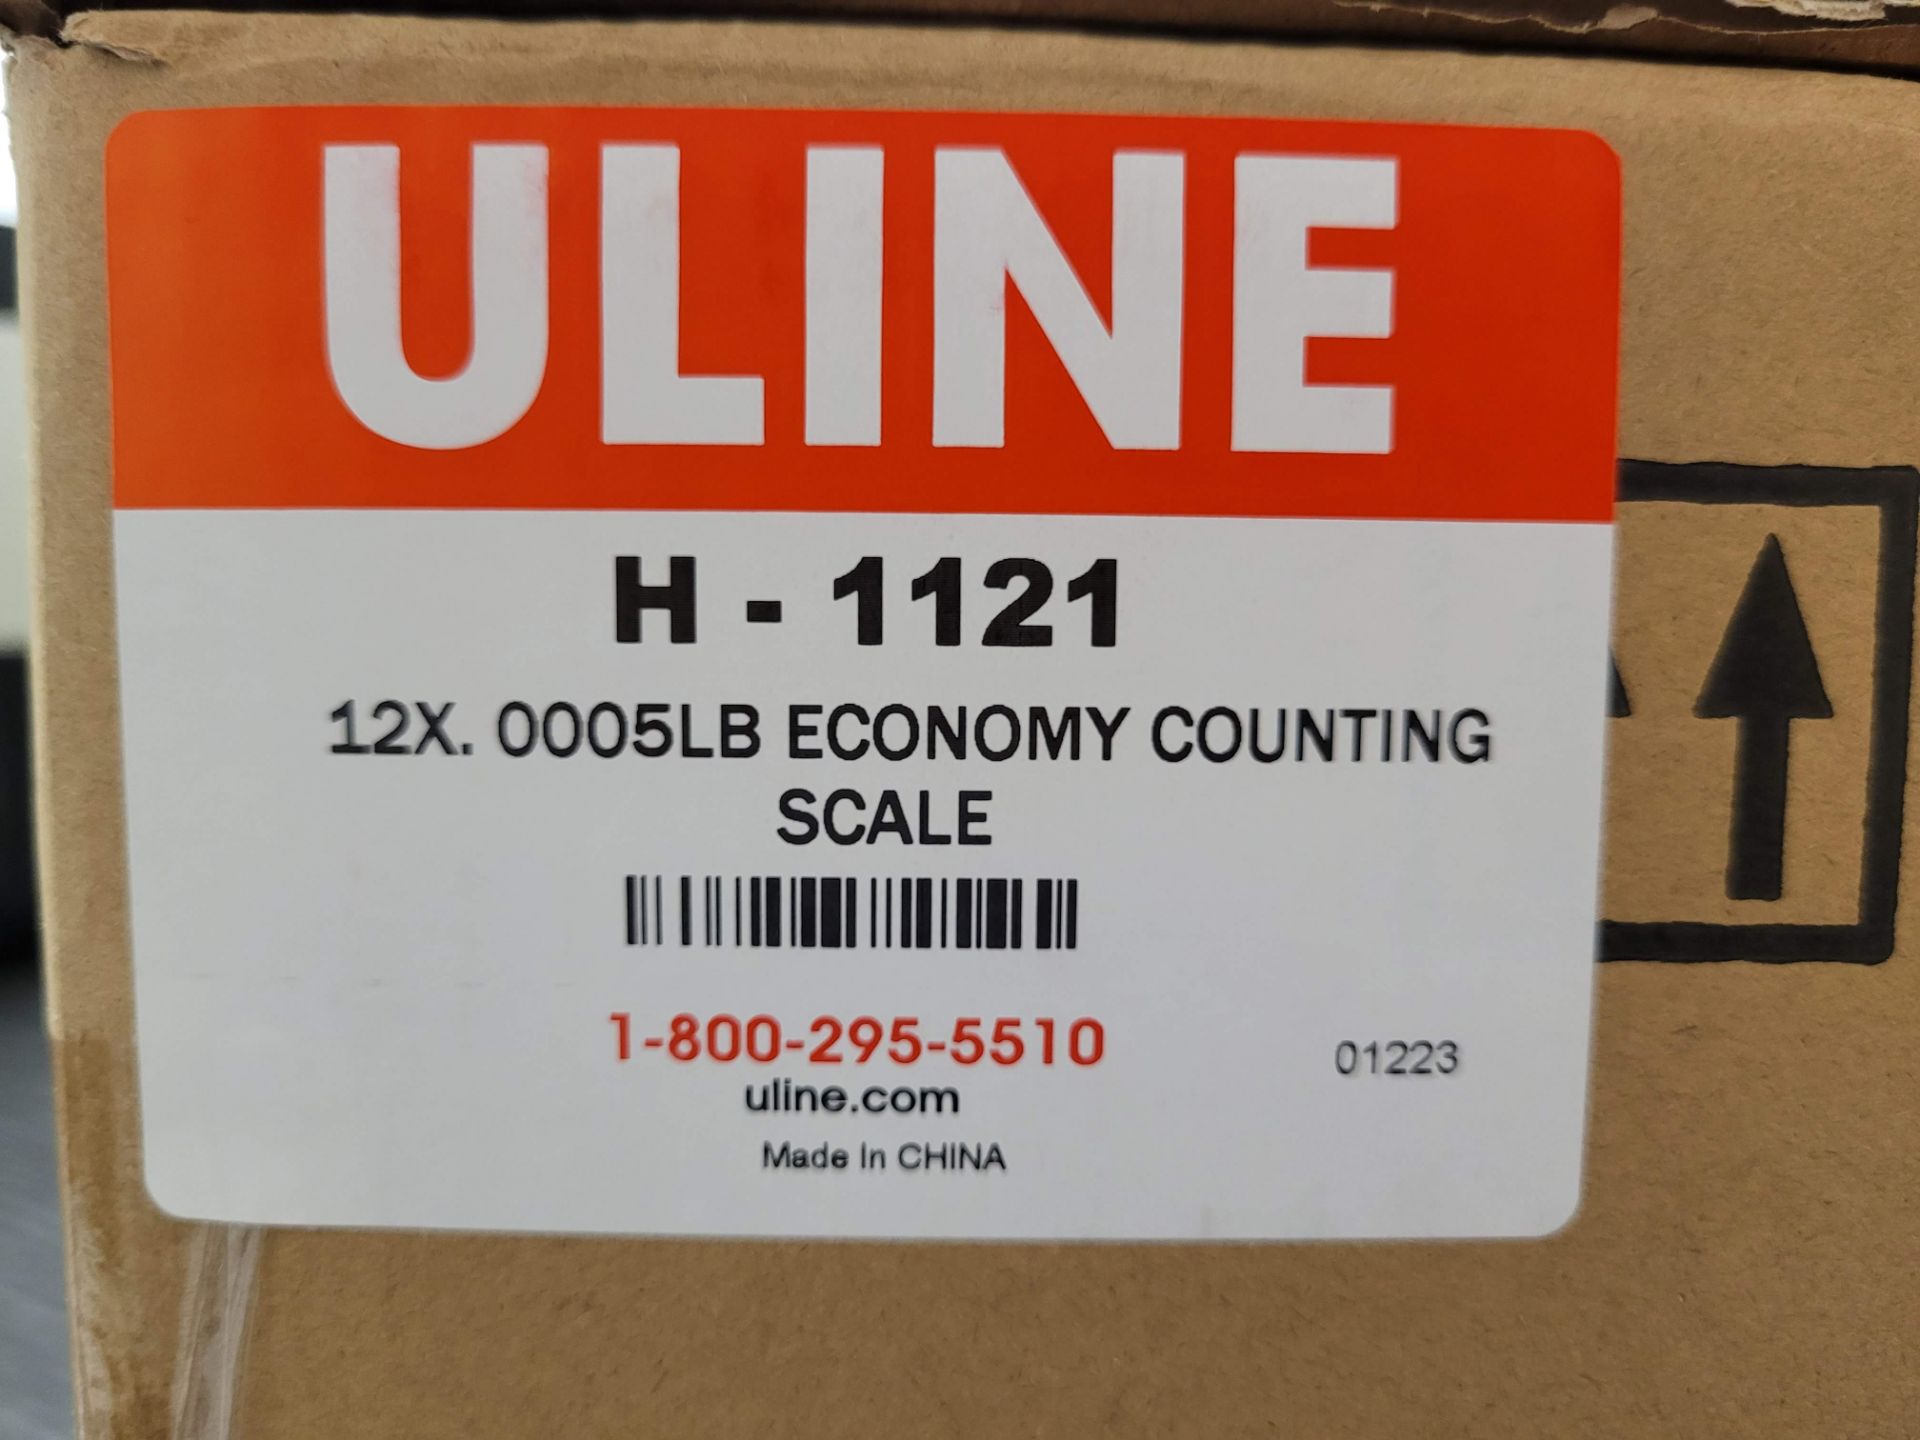 UNLINE H-1121 12 X 0005LB ECONOMY COUNTING SCALE - Image 4 of 4